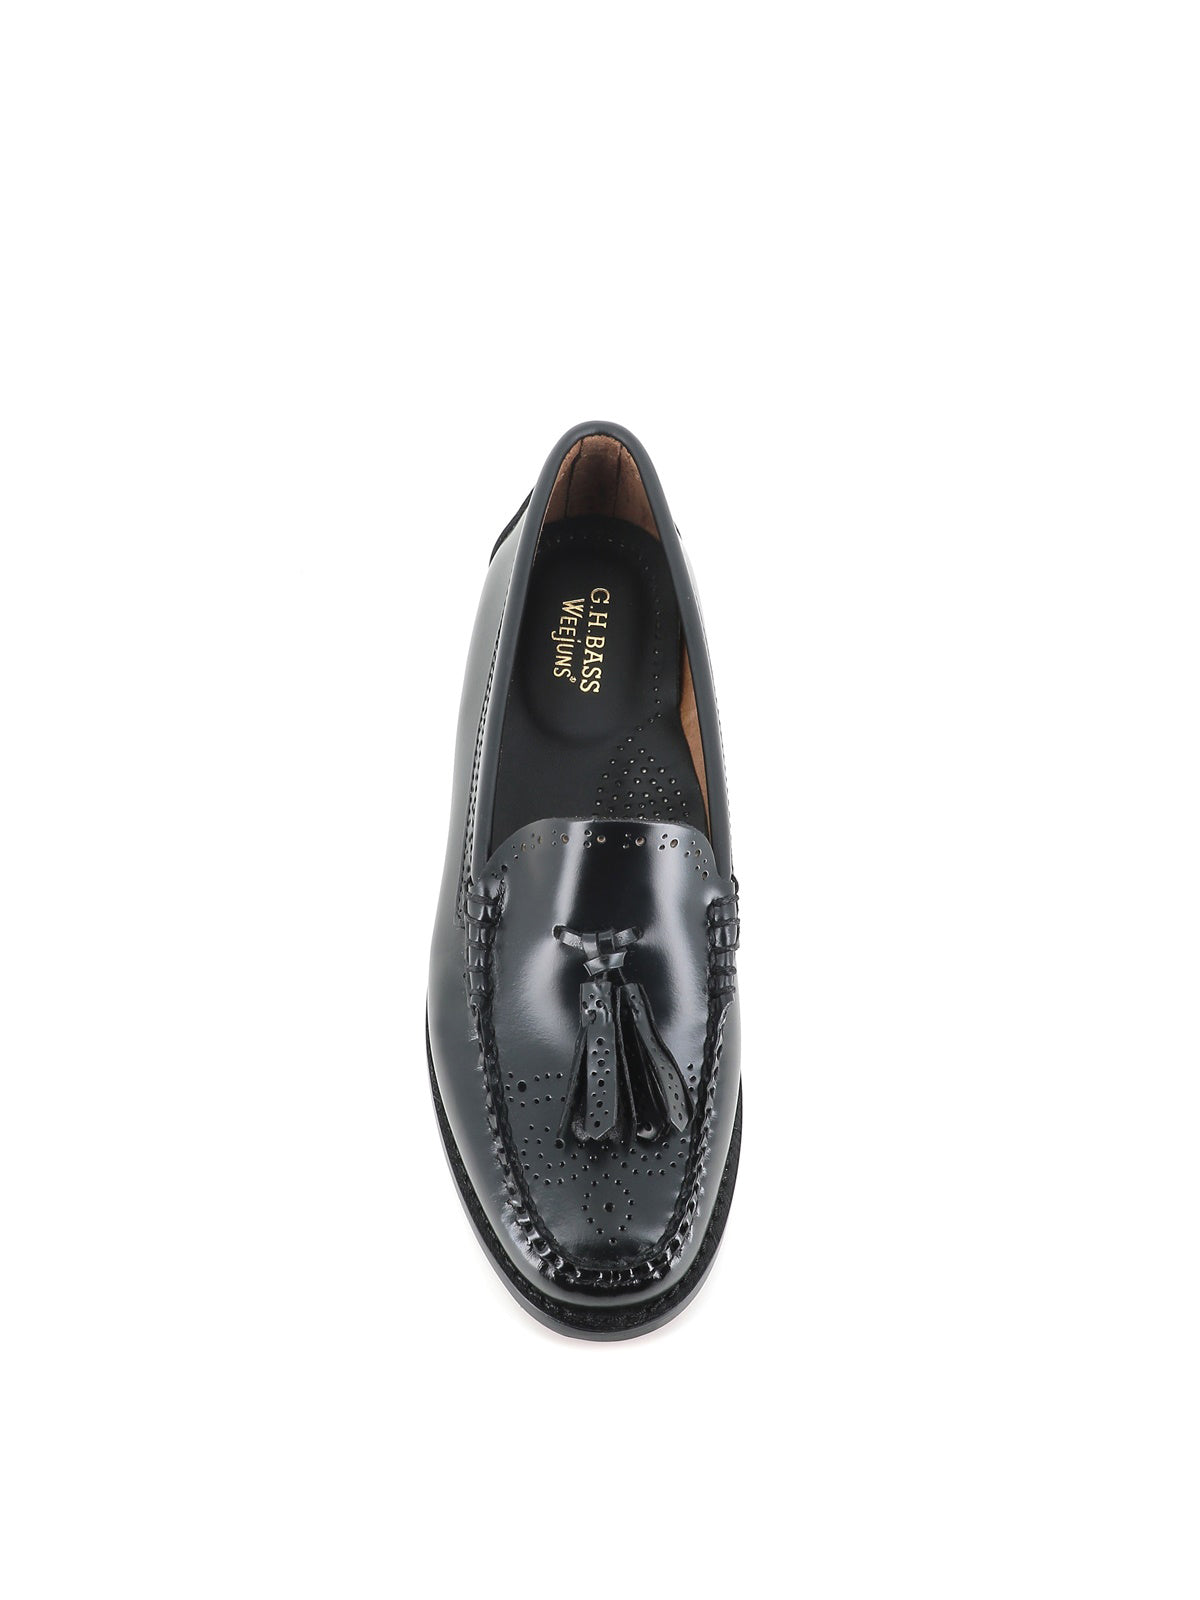  Estrelle Brogue Tassels Loafers Weejuns By G.h Bass & Co. Donna Nero - 5